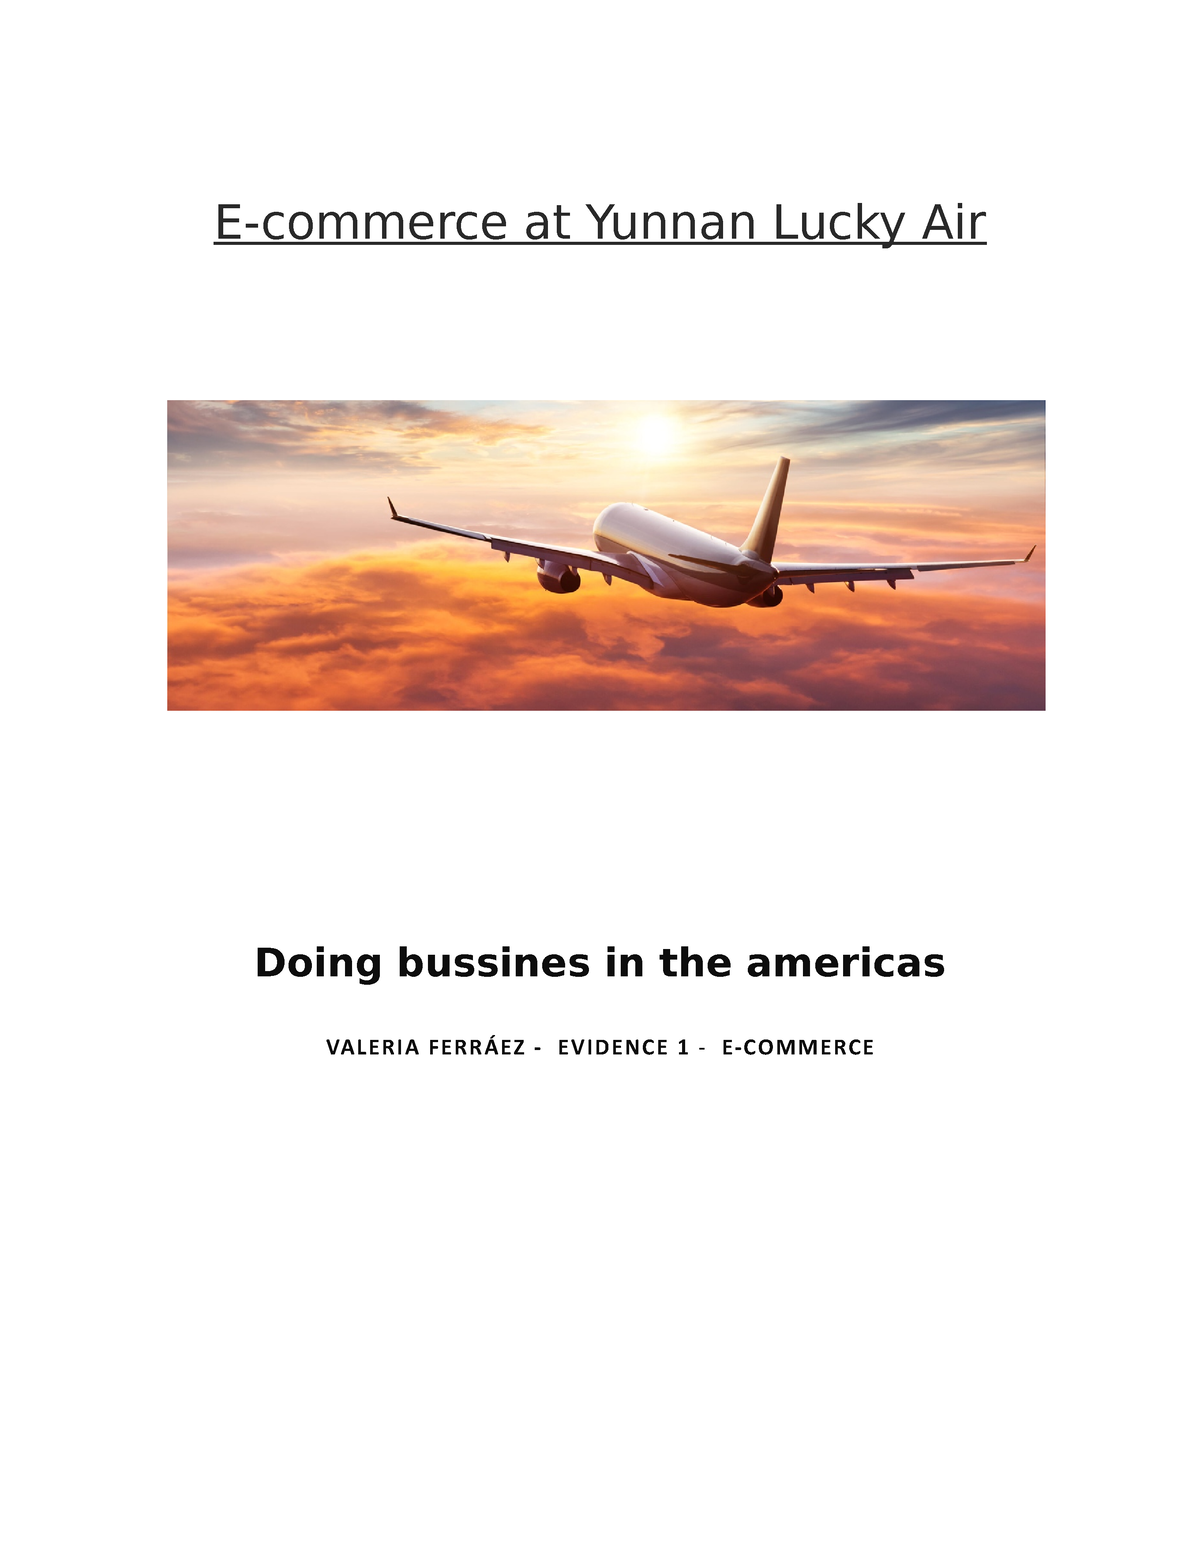 e commerce at yunnan lucky air case study answers